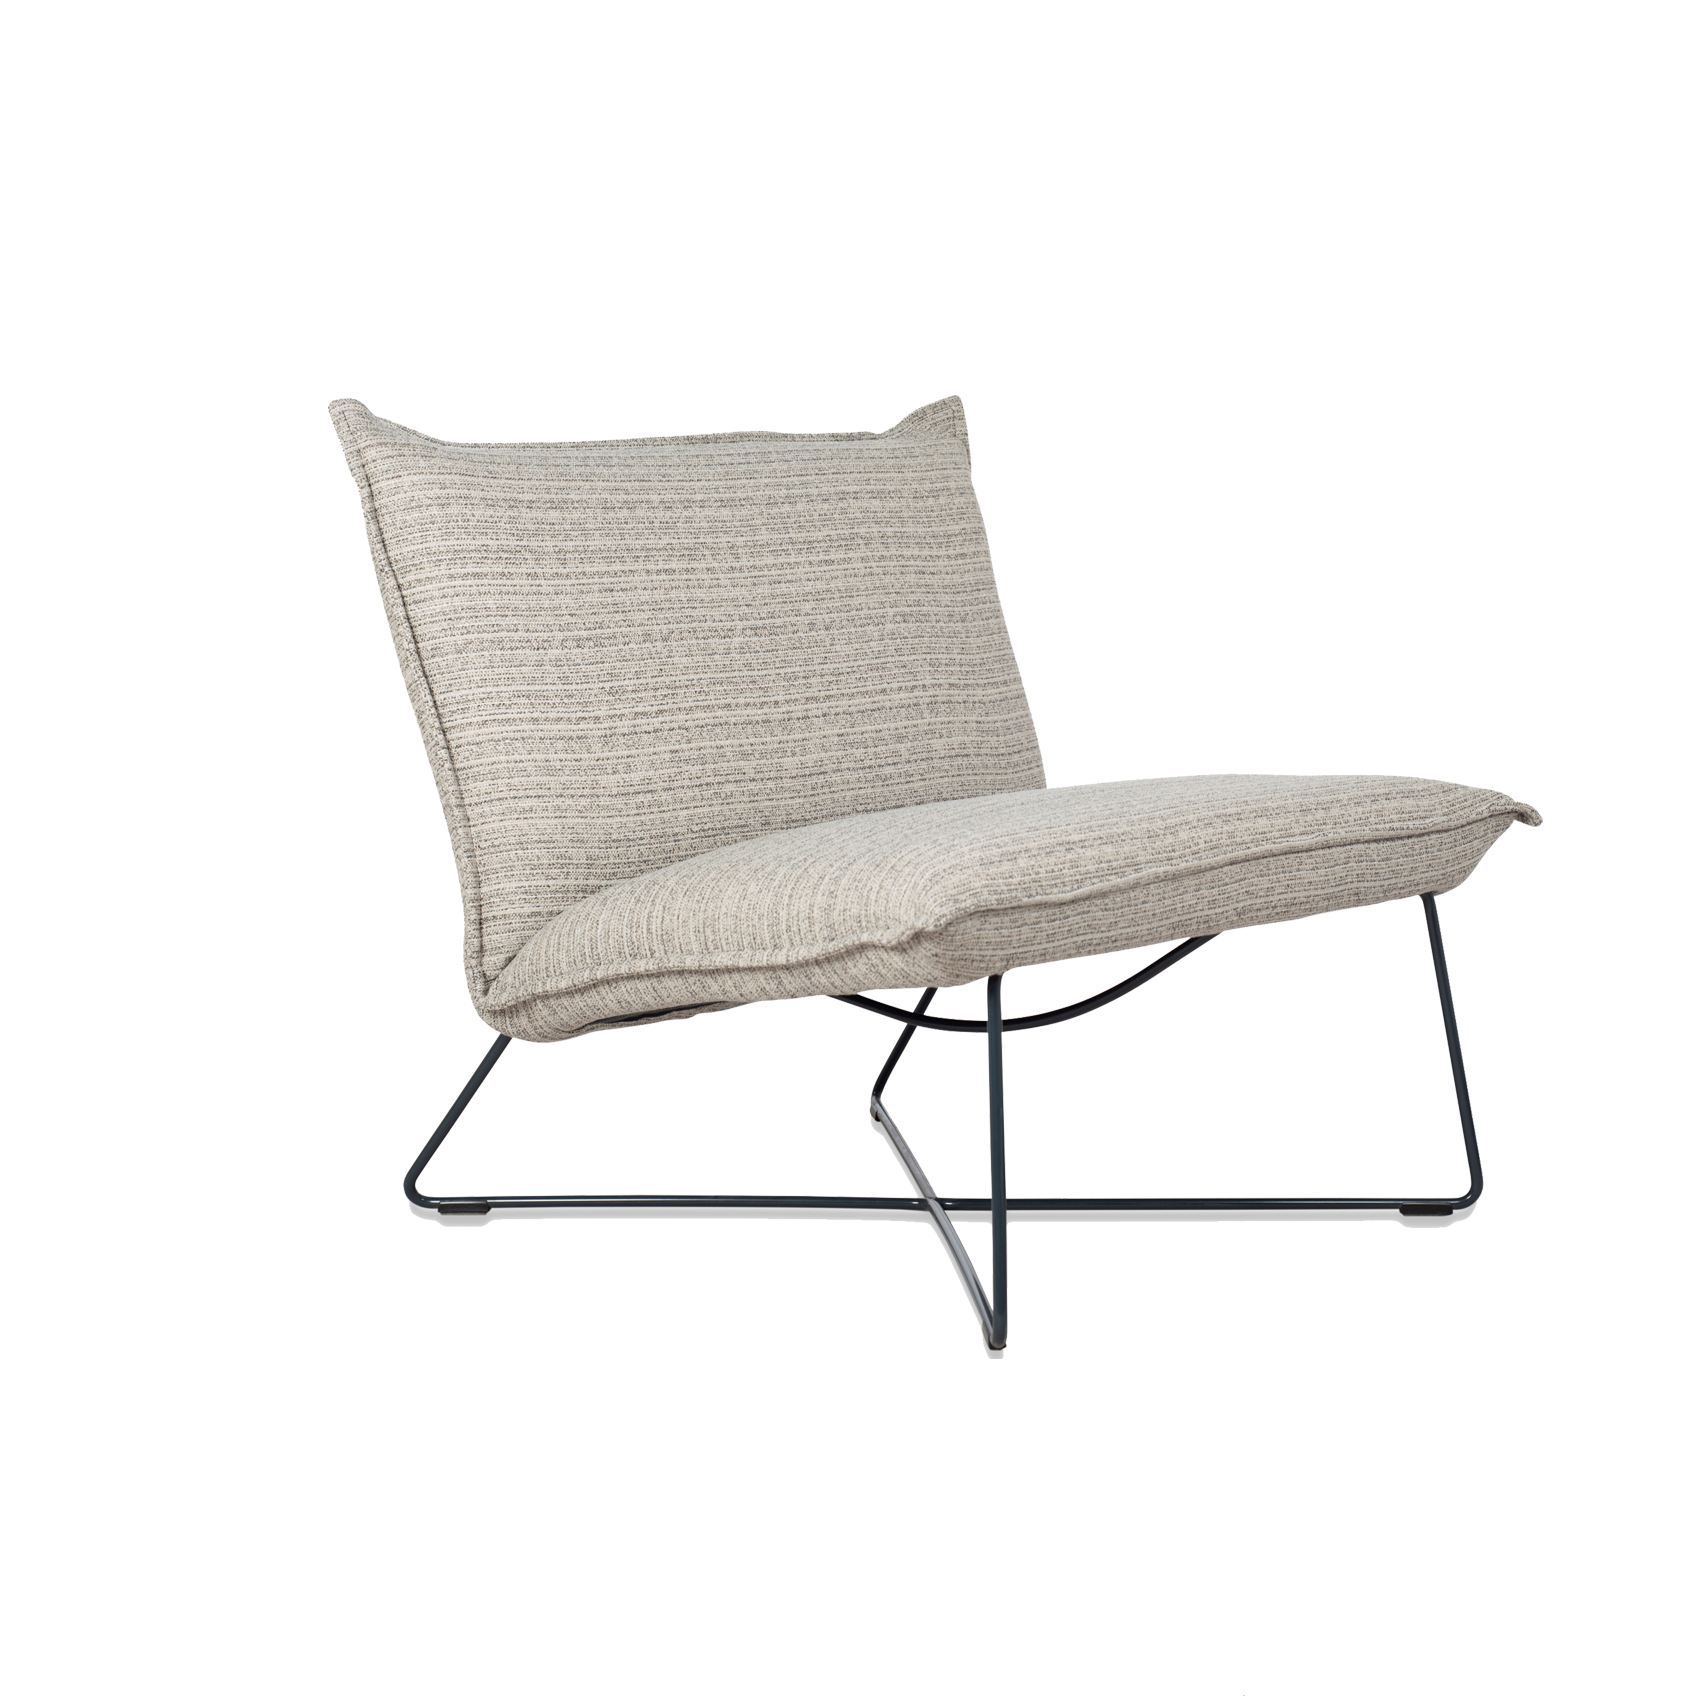 Earl Lounge Chair Low Outdoor.